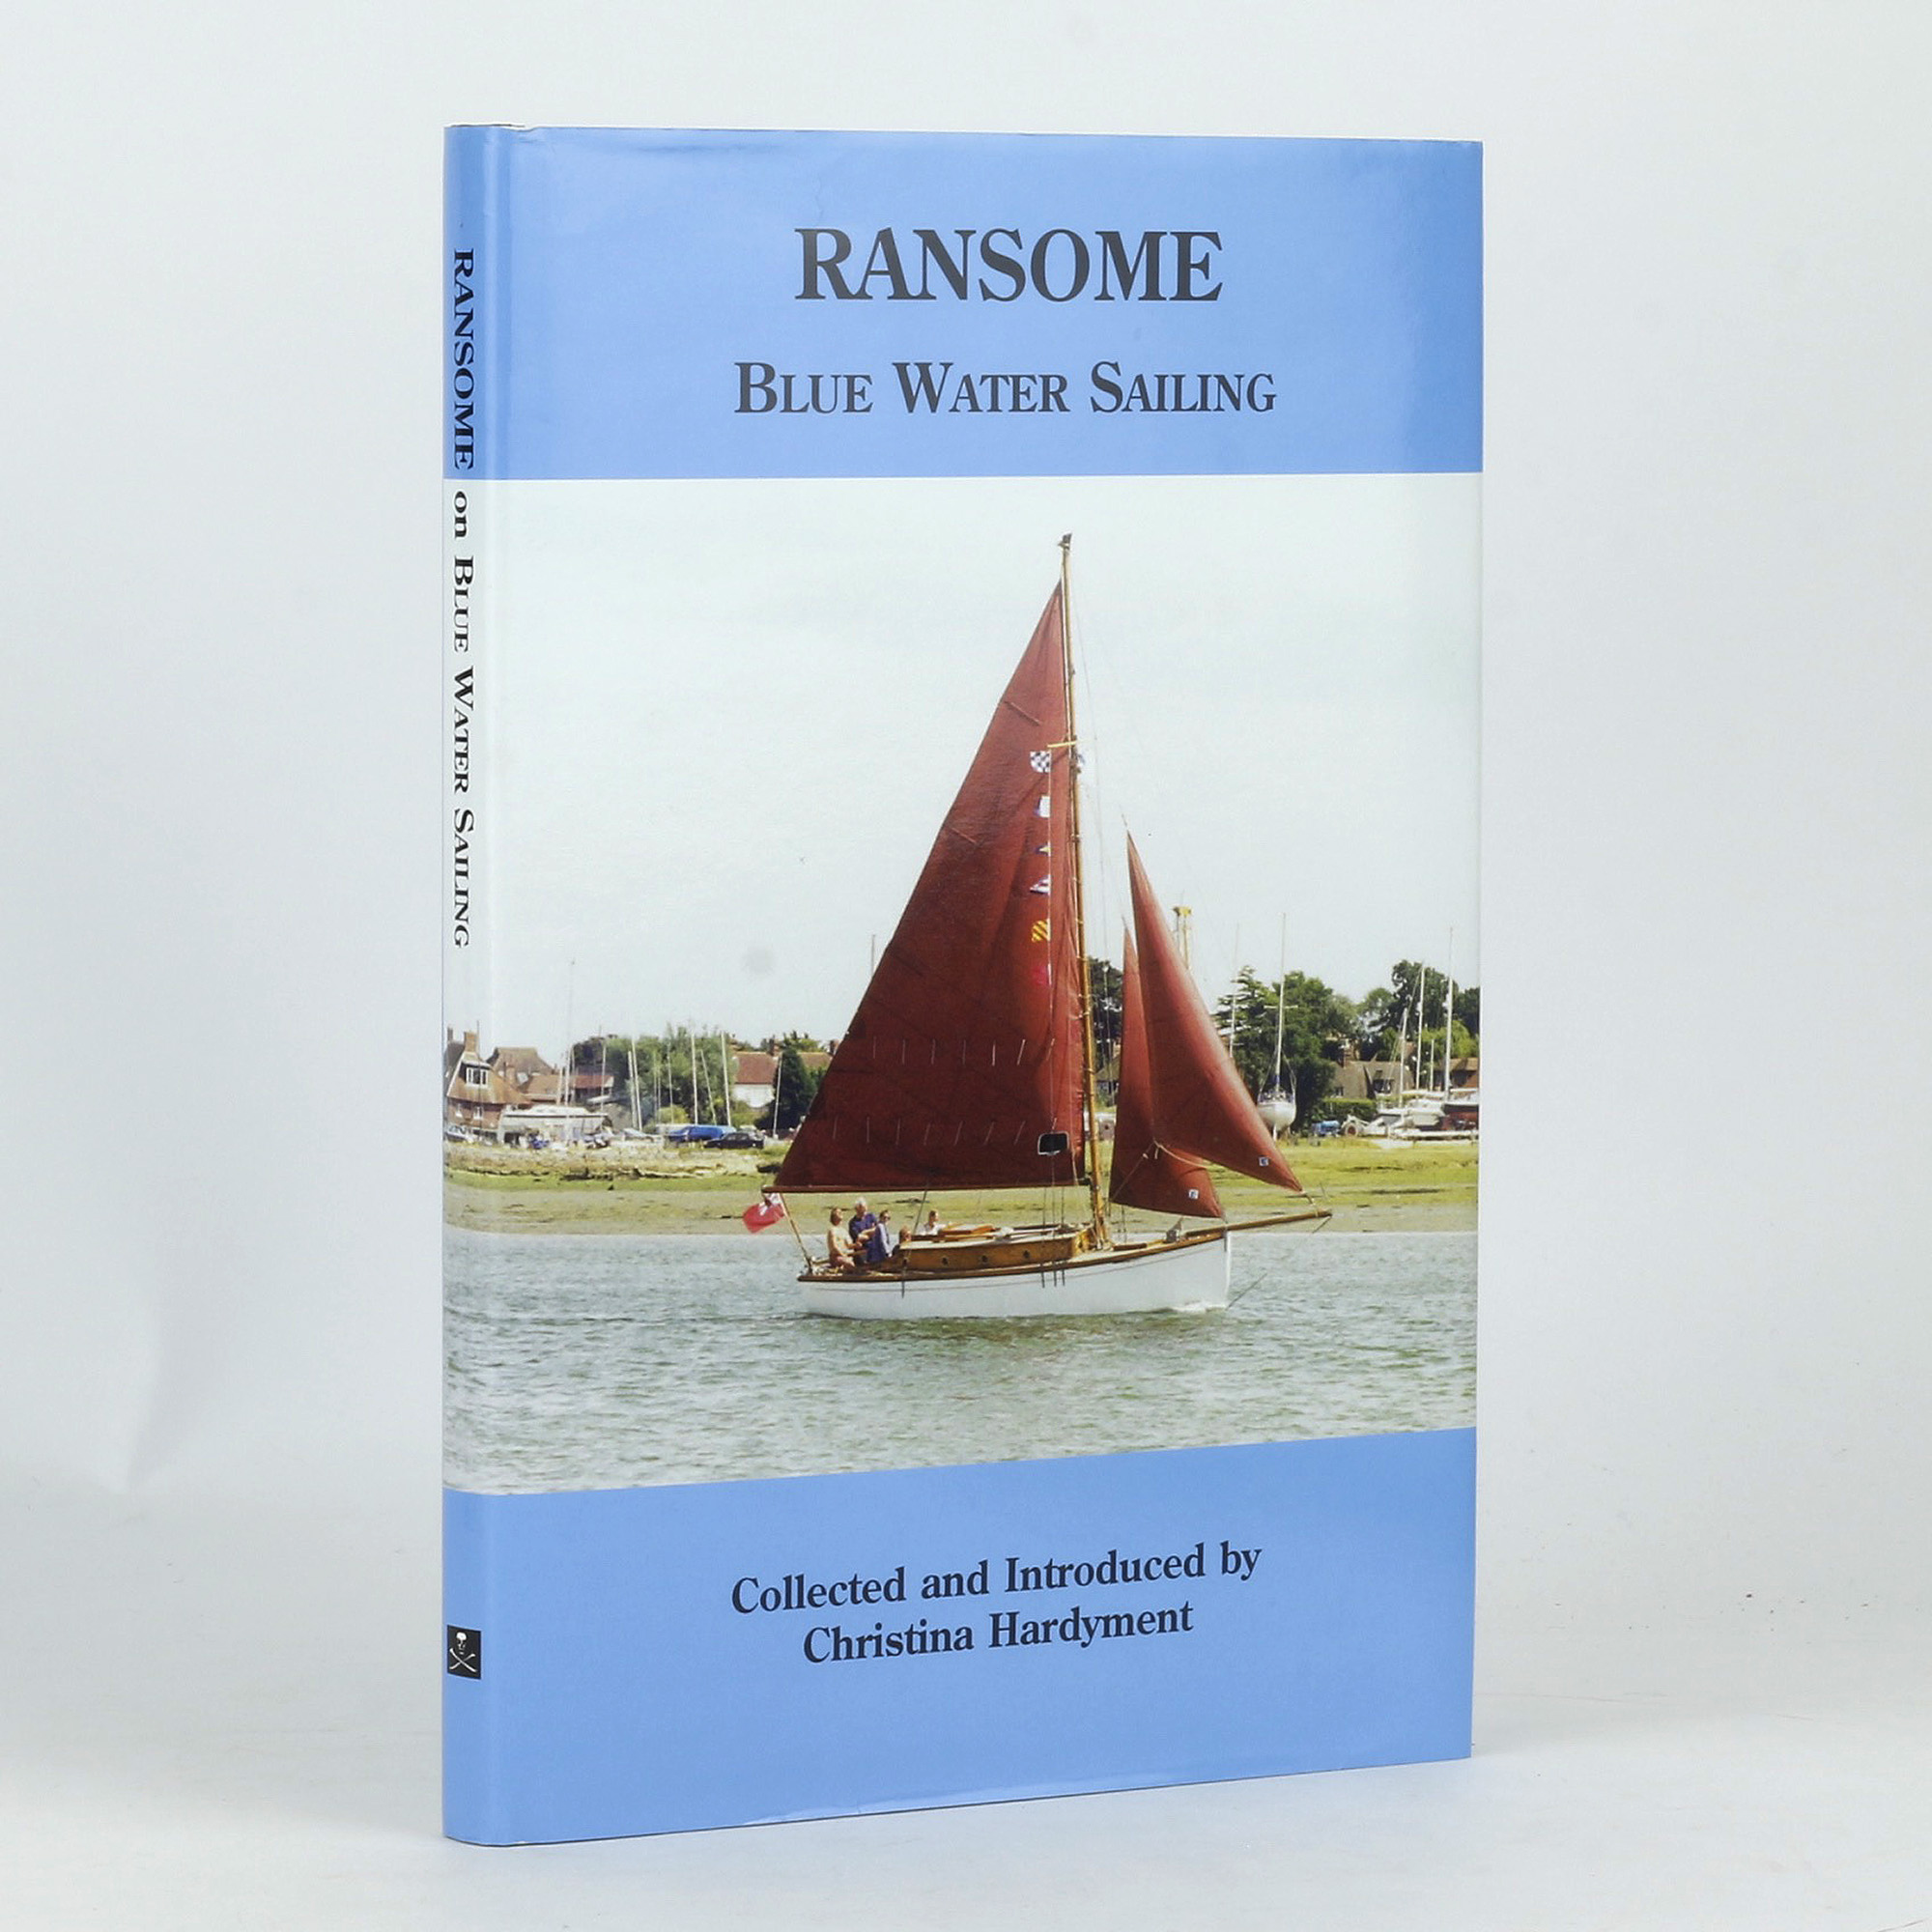 Ransome on Blue Water Sailing - , 